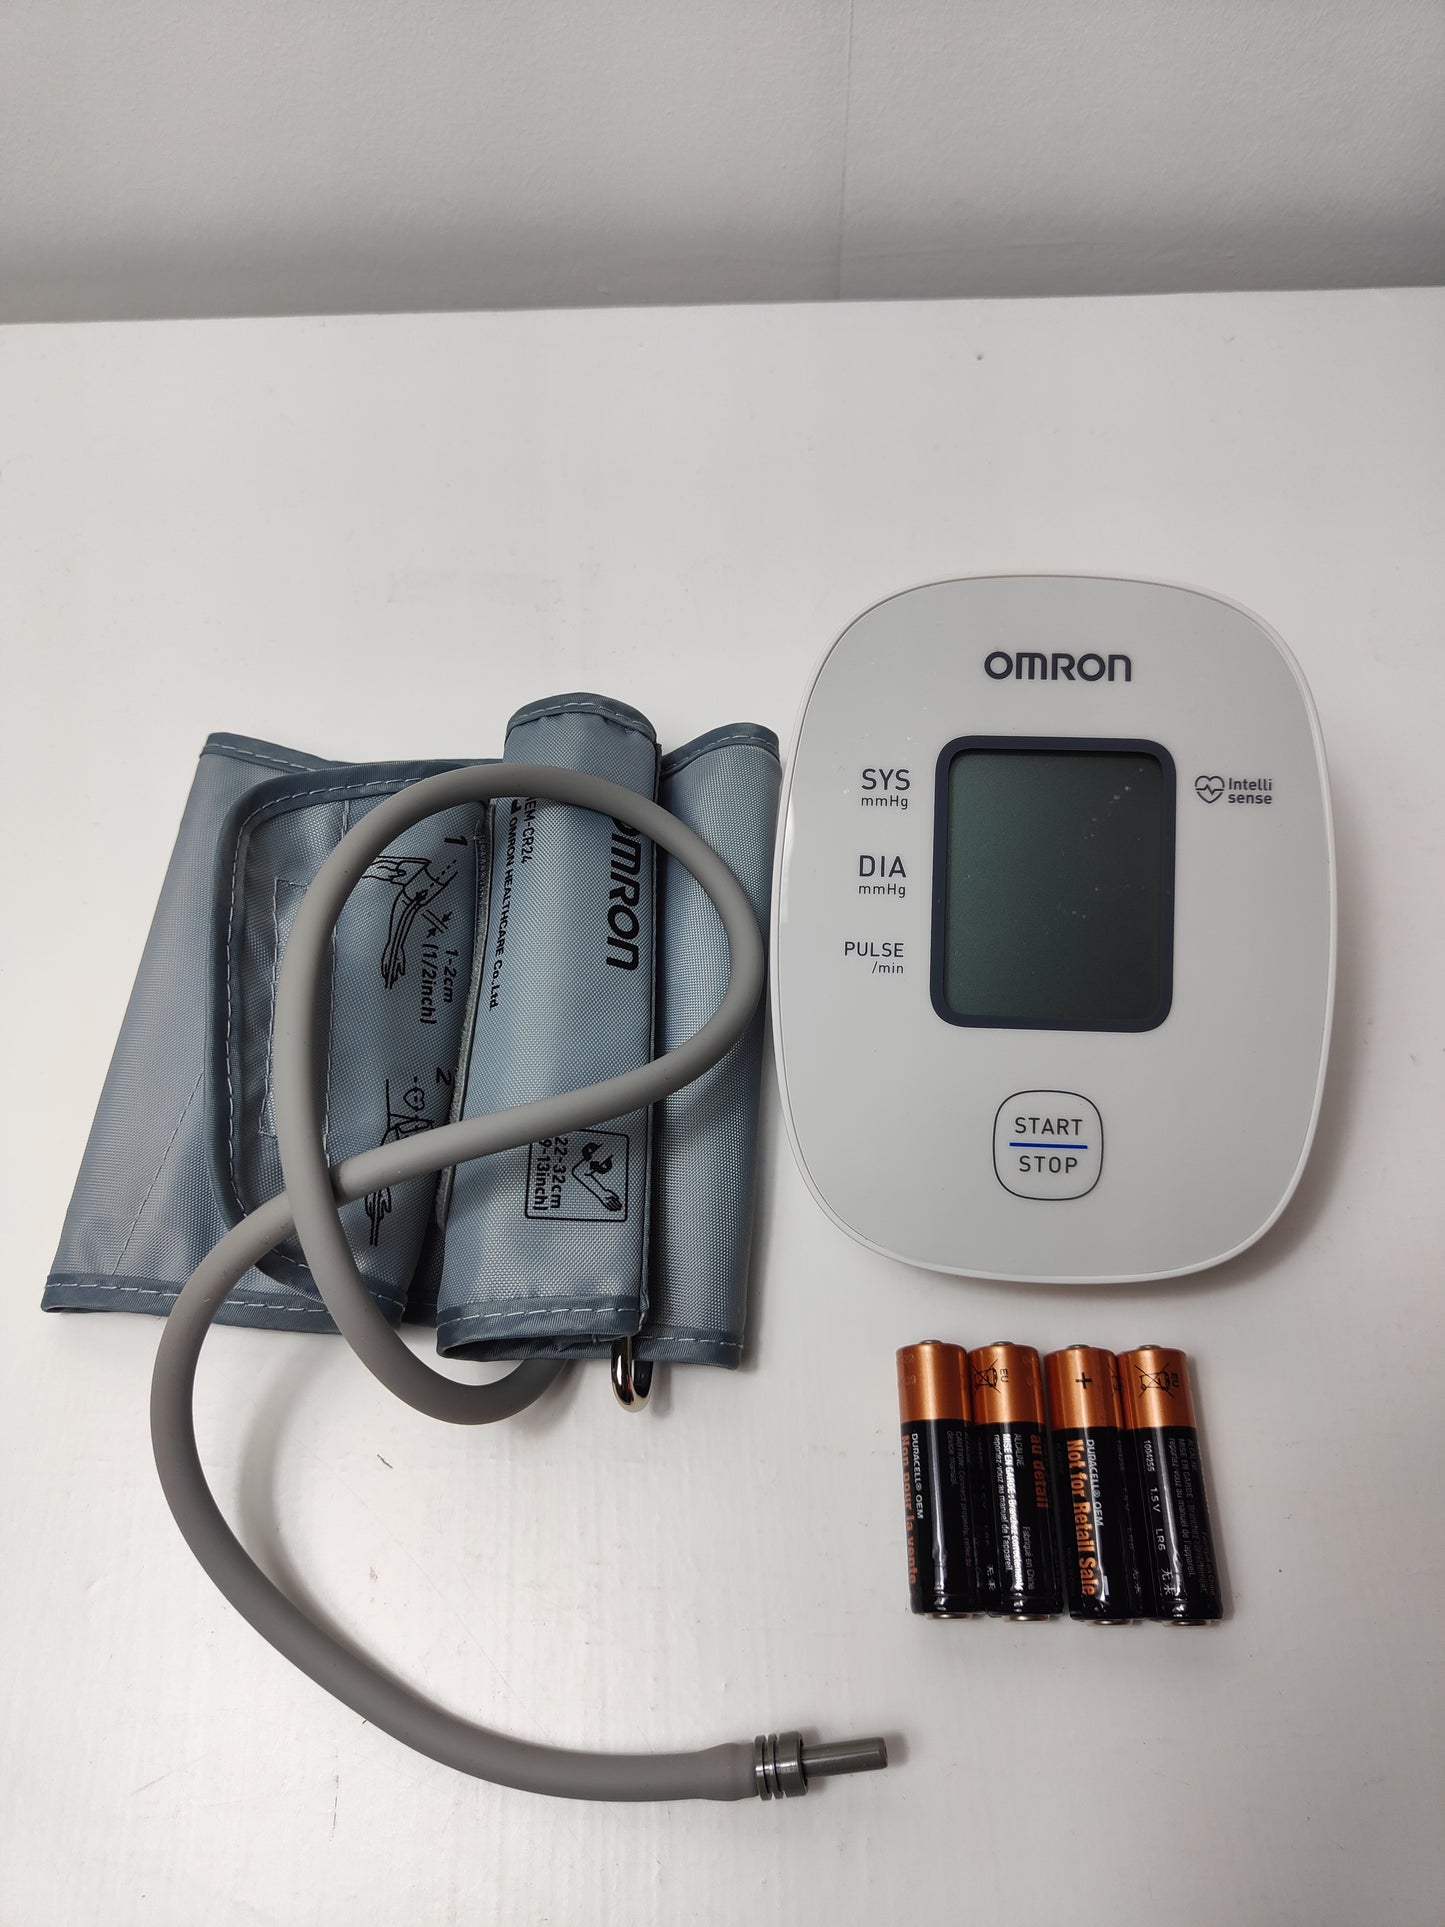 OMRON X2 Smart Automatic Upper Arm Blood Pressure Monitor